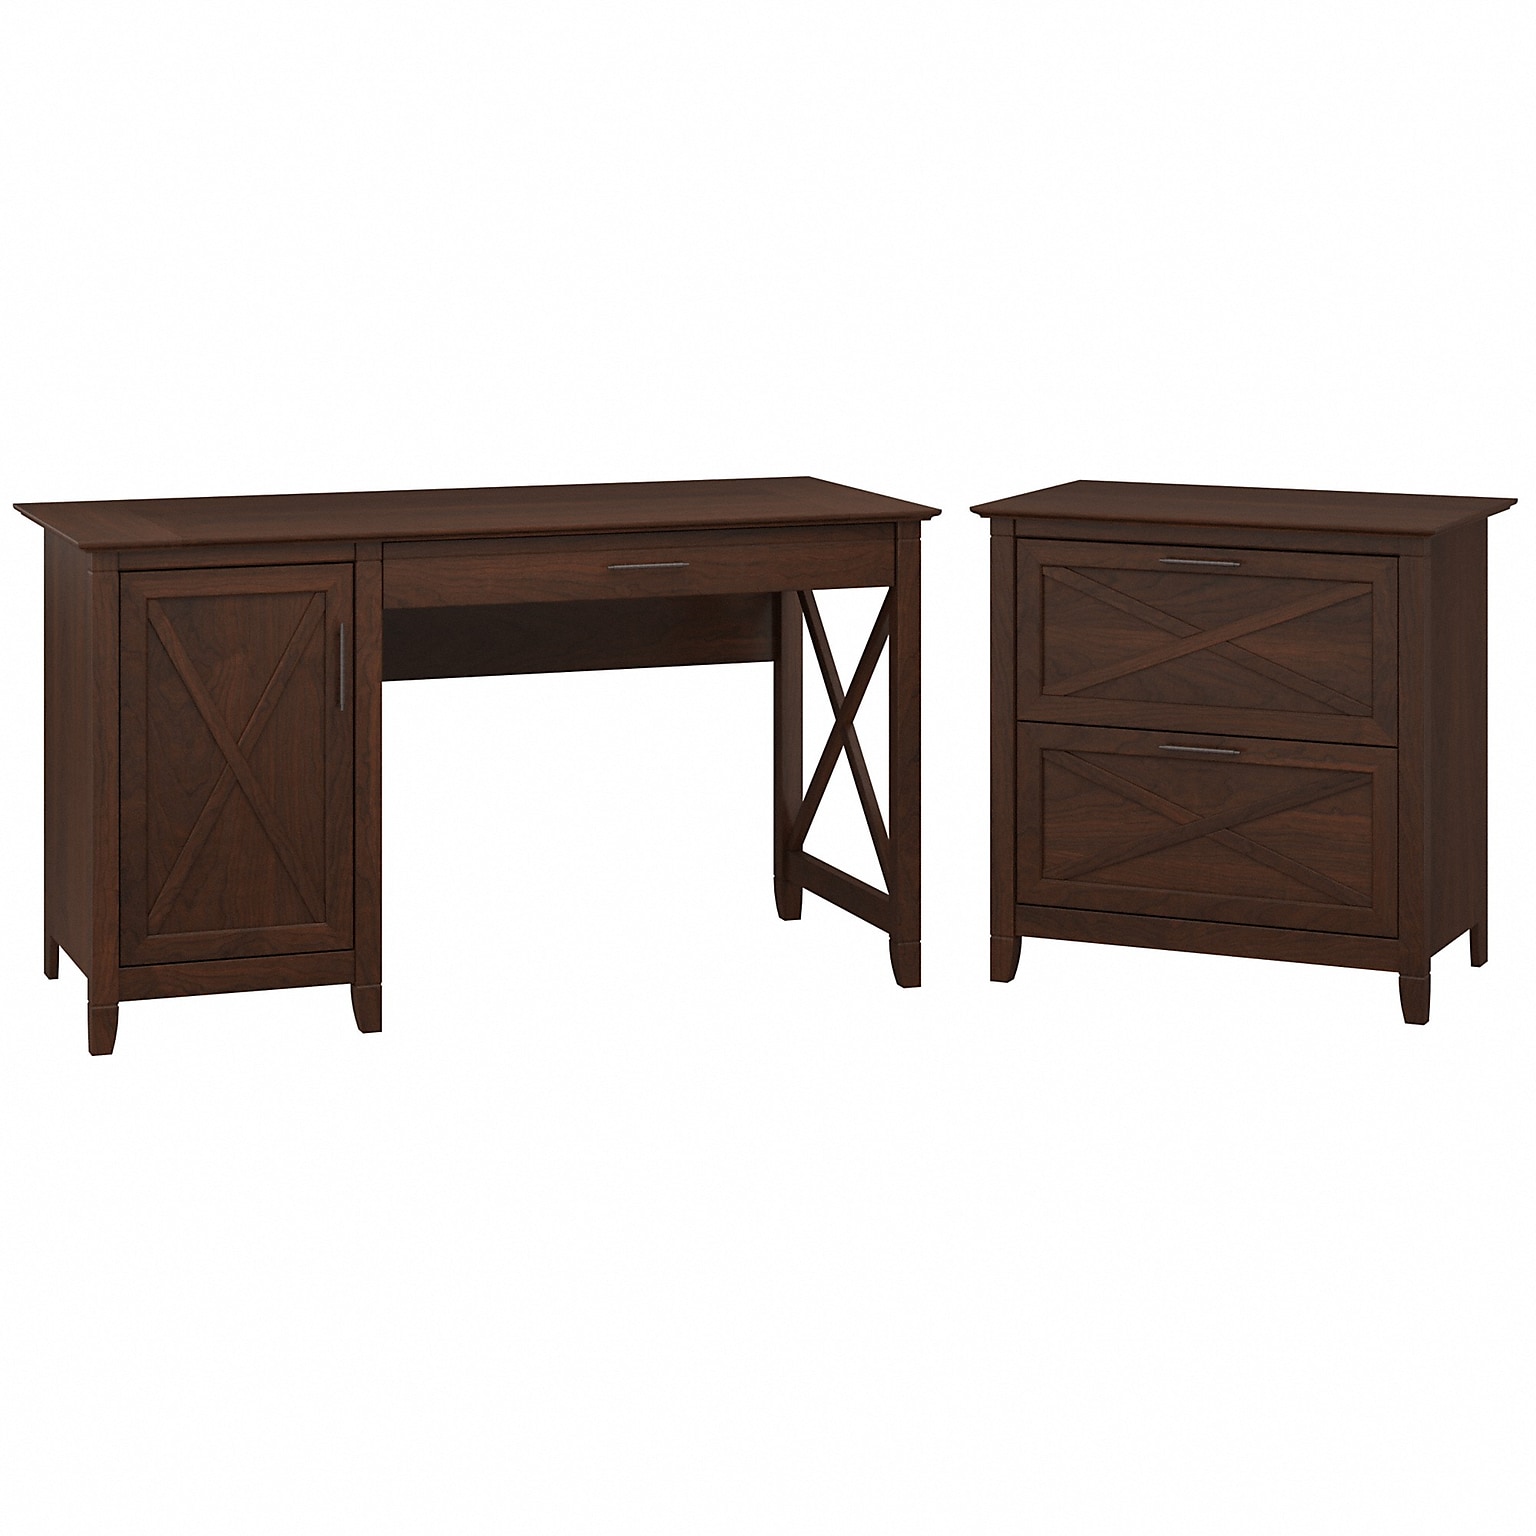 Bush Furniture Key West 54W Computer Desk with Storage and 2 Drawer Lateral File Cabinet, Bing Cherry (KWS008BC)